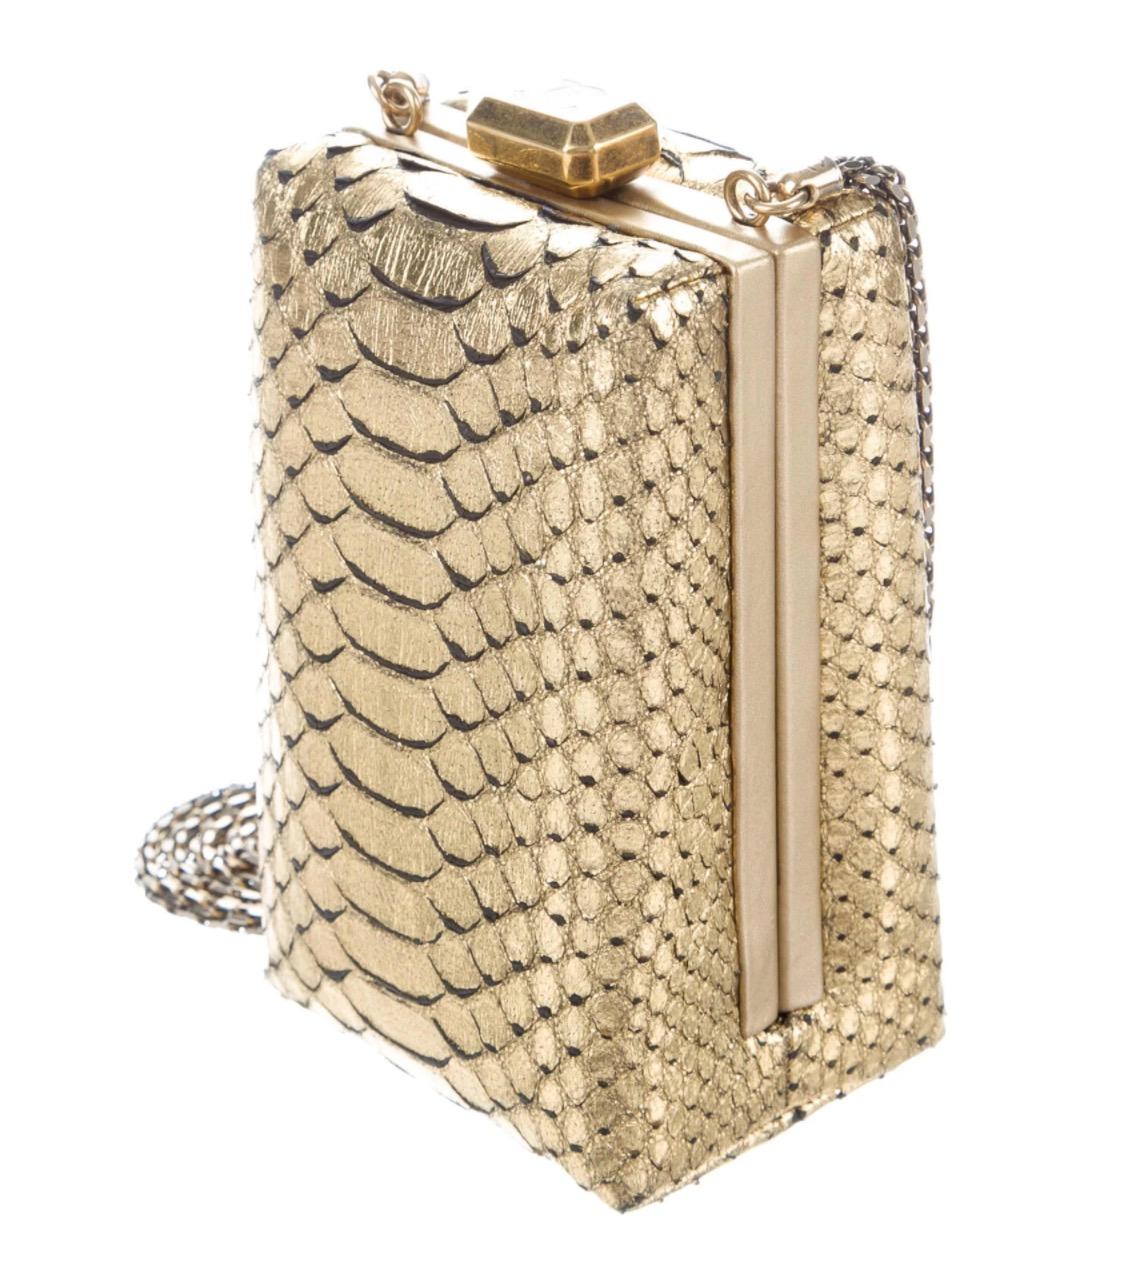 
Python 
Leather
Gold-tone hardware
Leather lining
Kiss-lock closure
Includes box
100% authenticity guaranteed

NEWFOUND LUXURY is the premier luxury fashion dealer on the 1stDibs platform. Since 2015, NEWFOUND LUXURY has maintained the ‘Recognized’